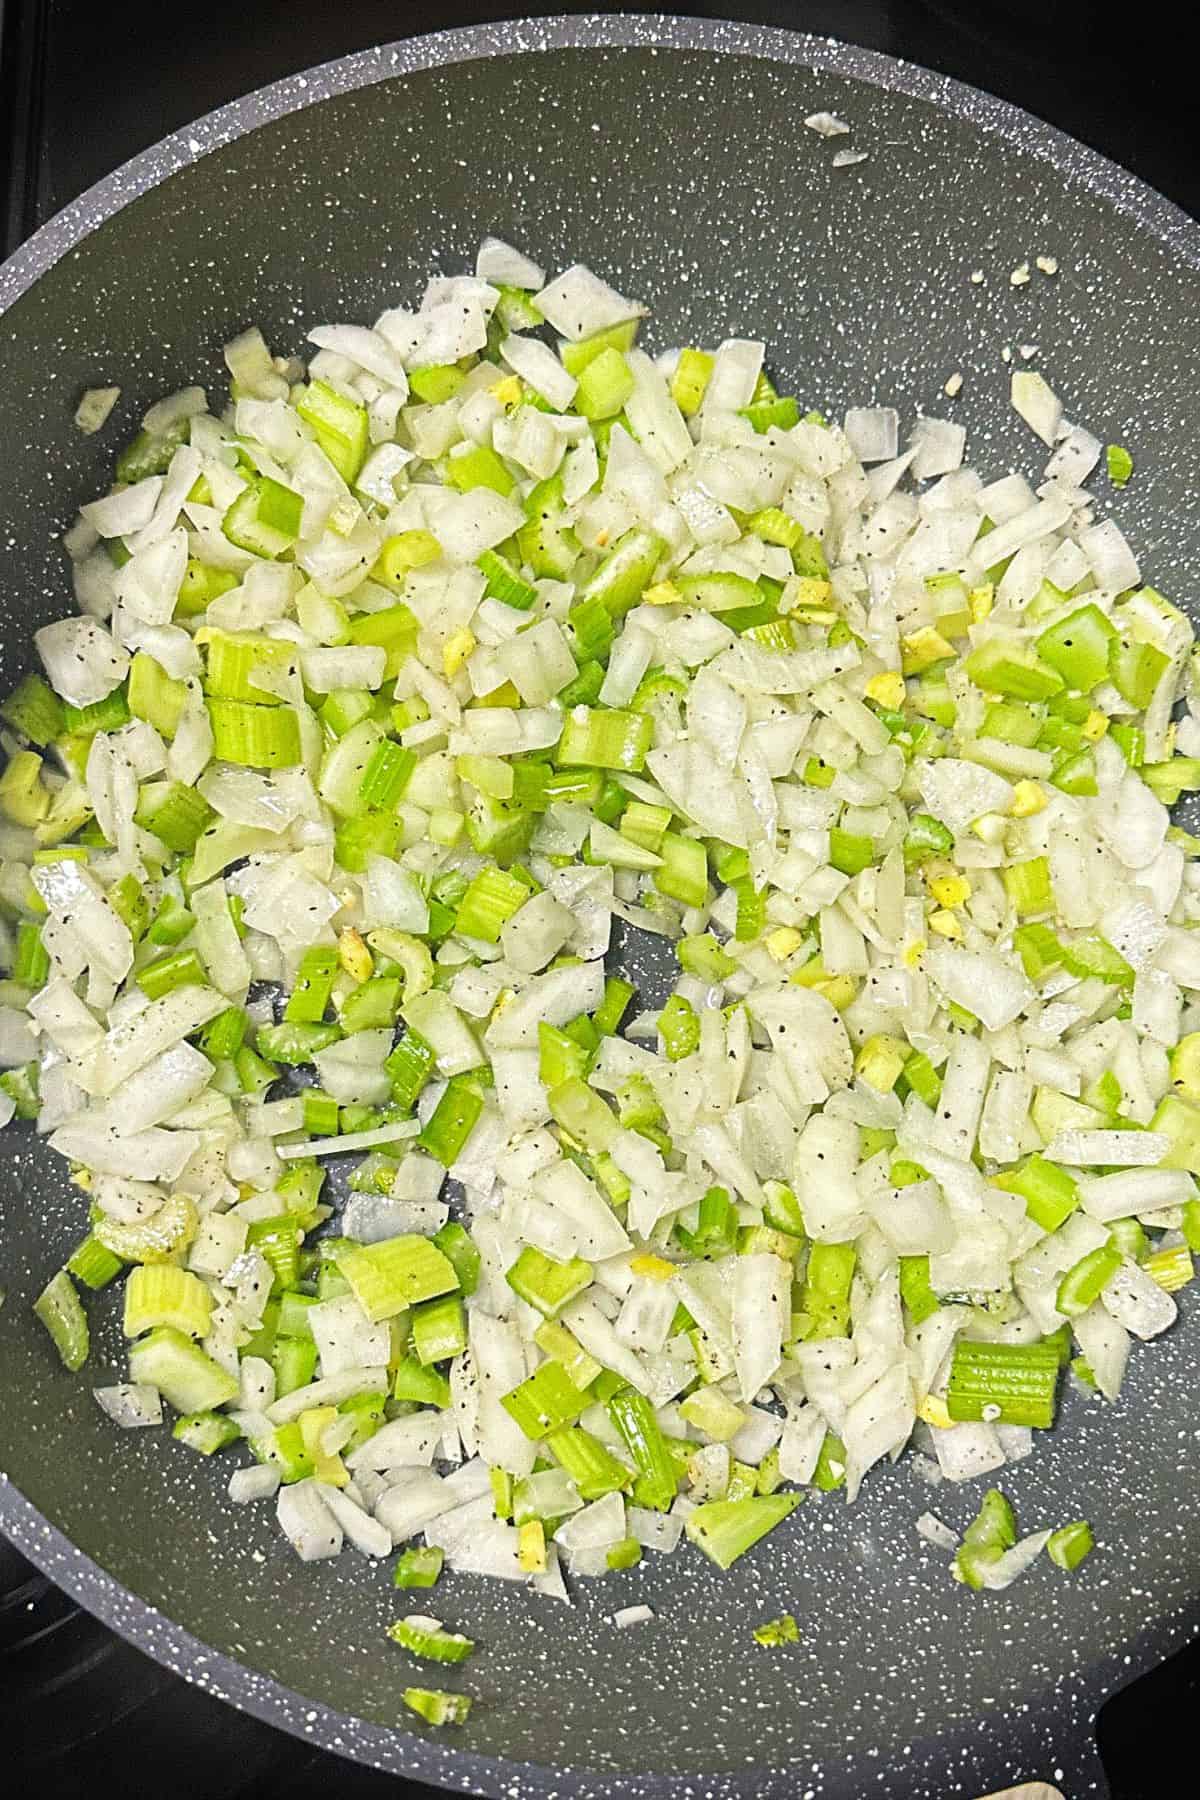 Diced celery and onions being sautéed in a skillet, seasoned with black pepper.